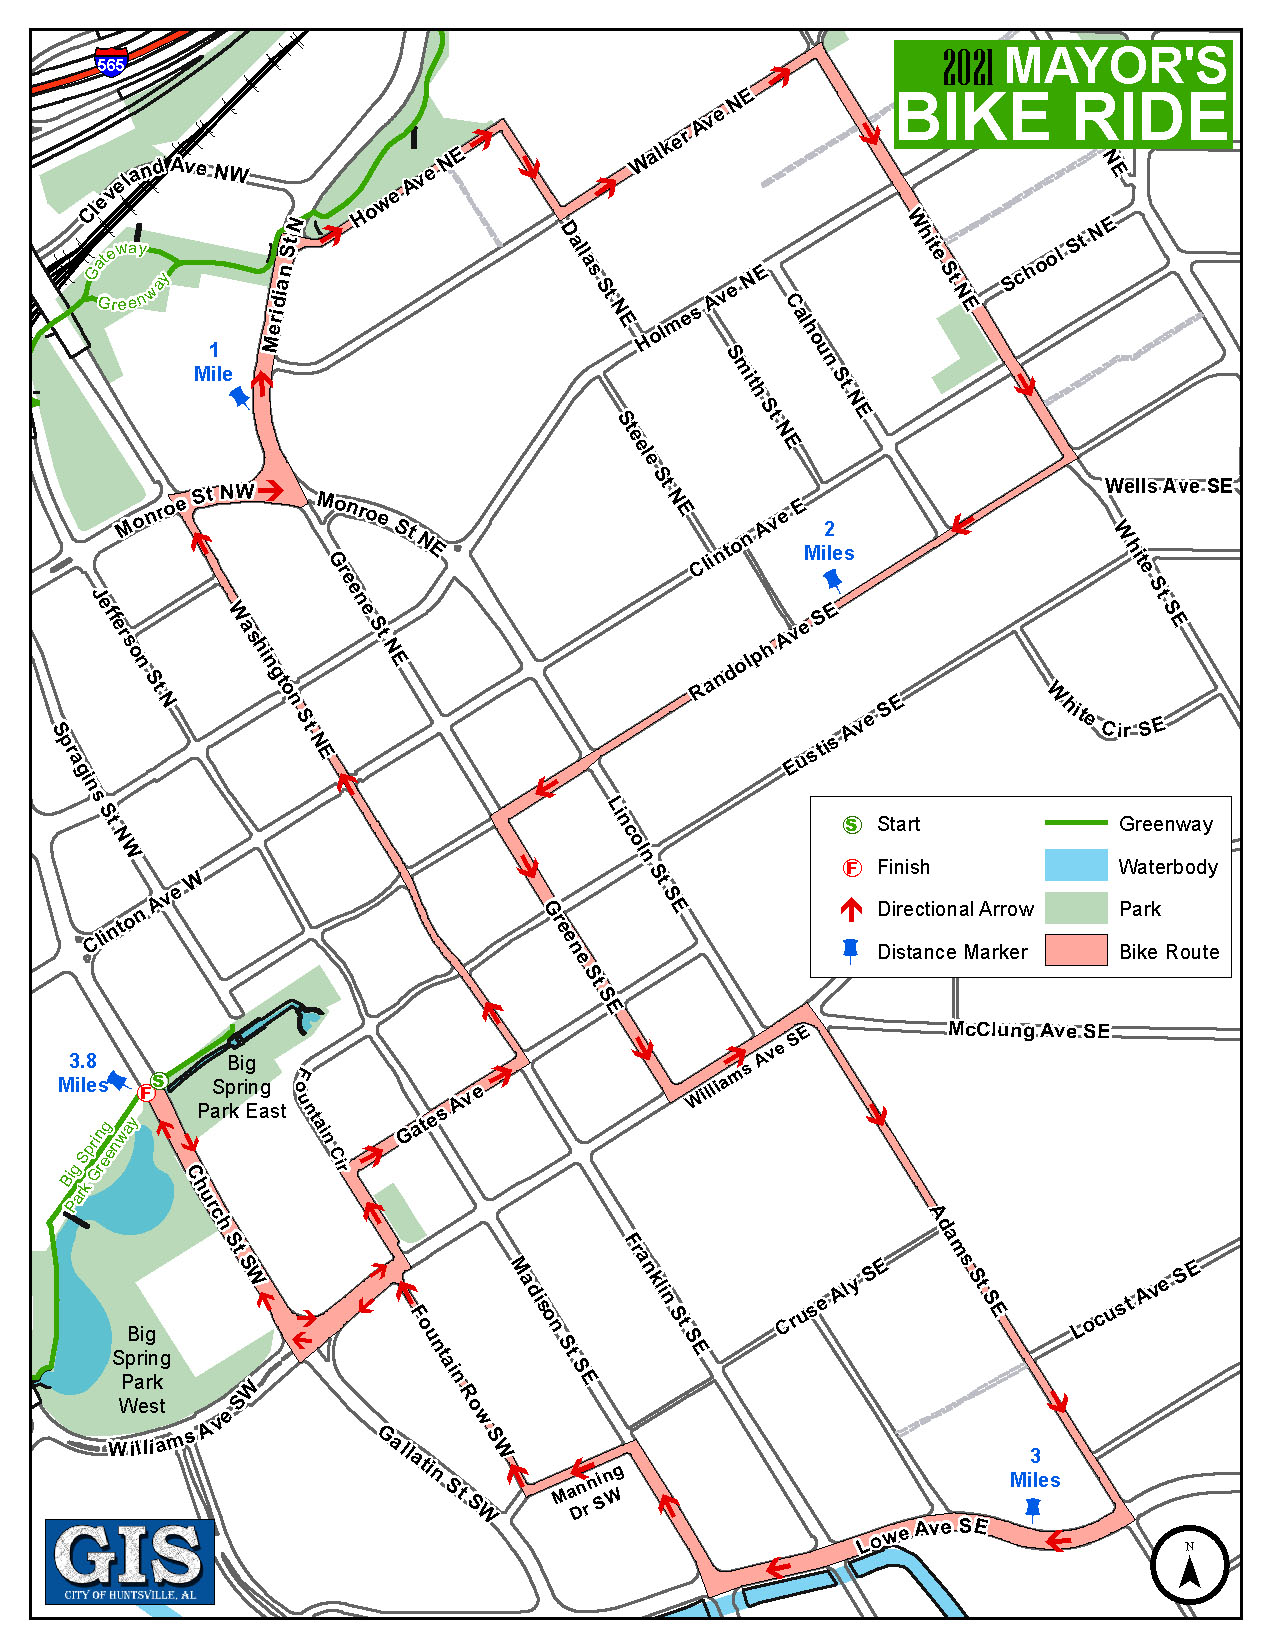 2021 Mayors Bike Ride Route Map